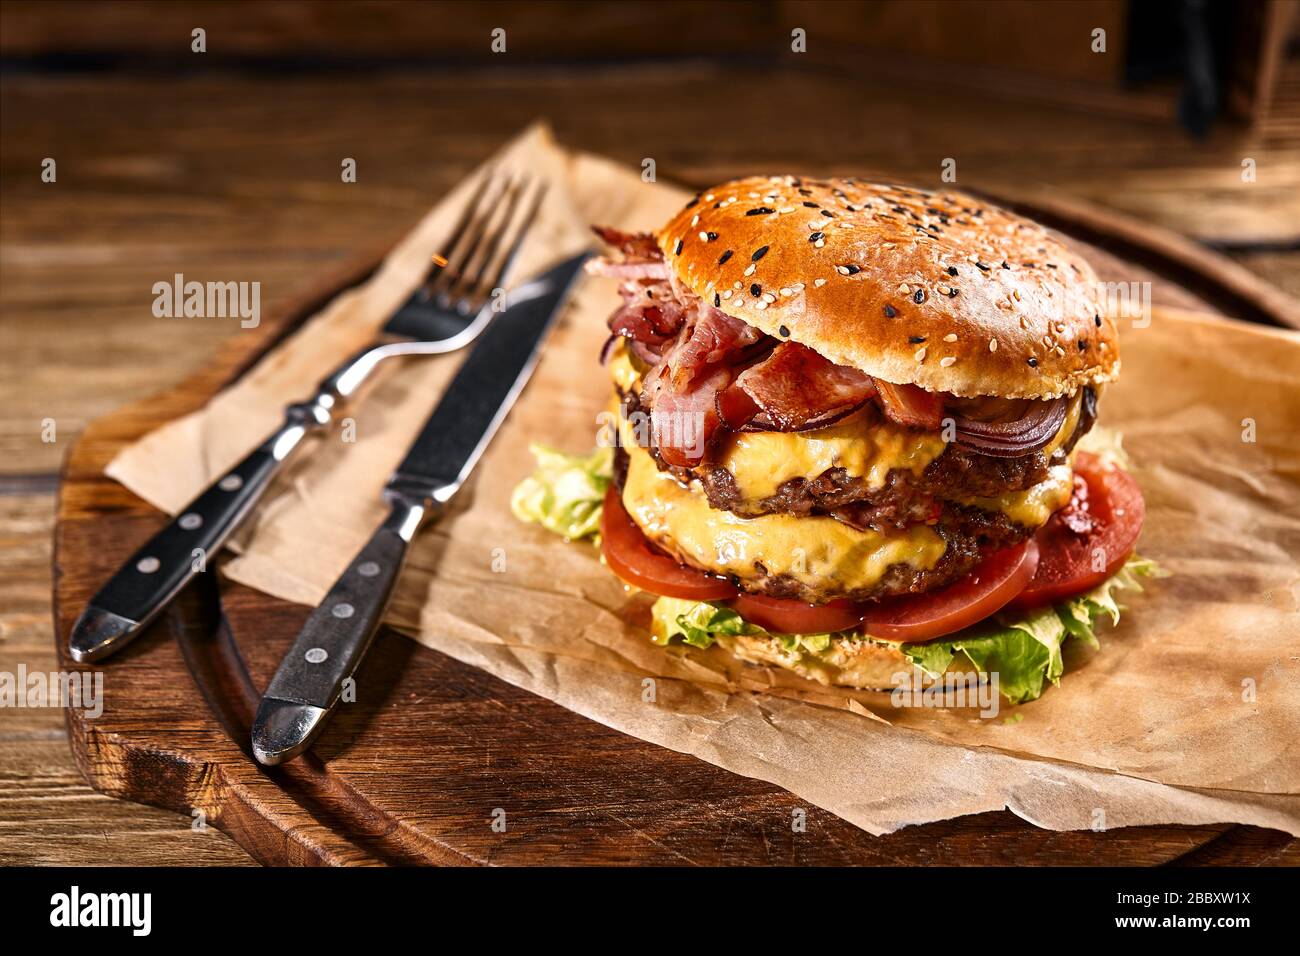 Juicy American burger, hamburger or cheeseburger with two beef patties, with sauce and basked on a black background. Concept of American fast food Stock Photo